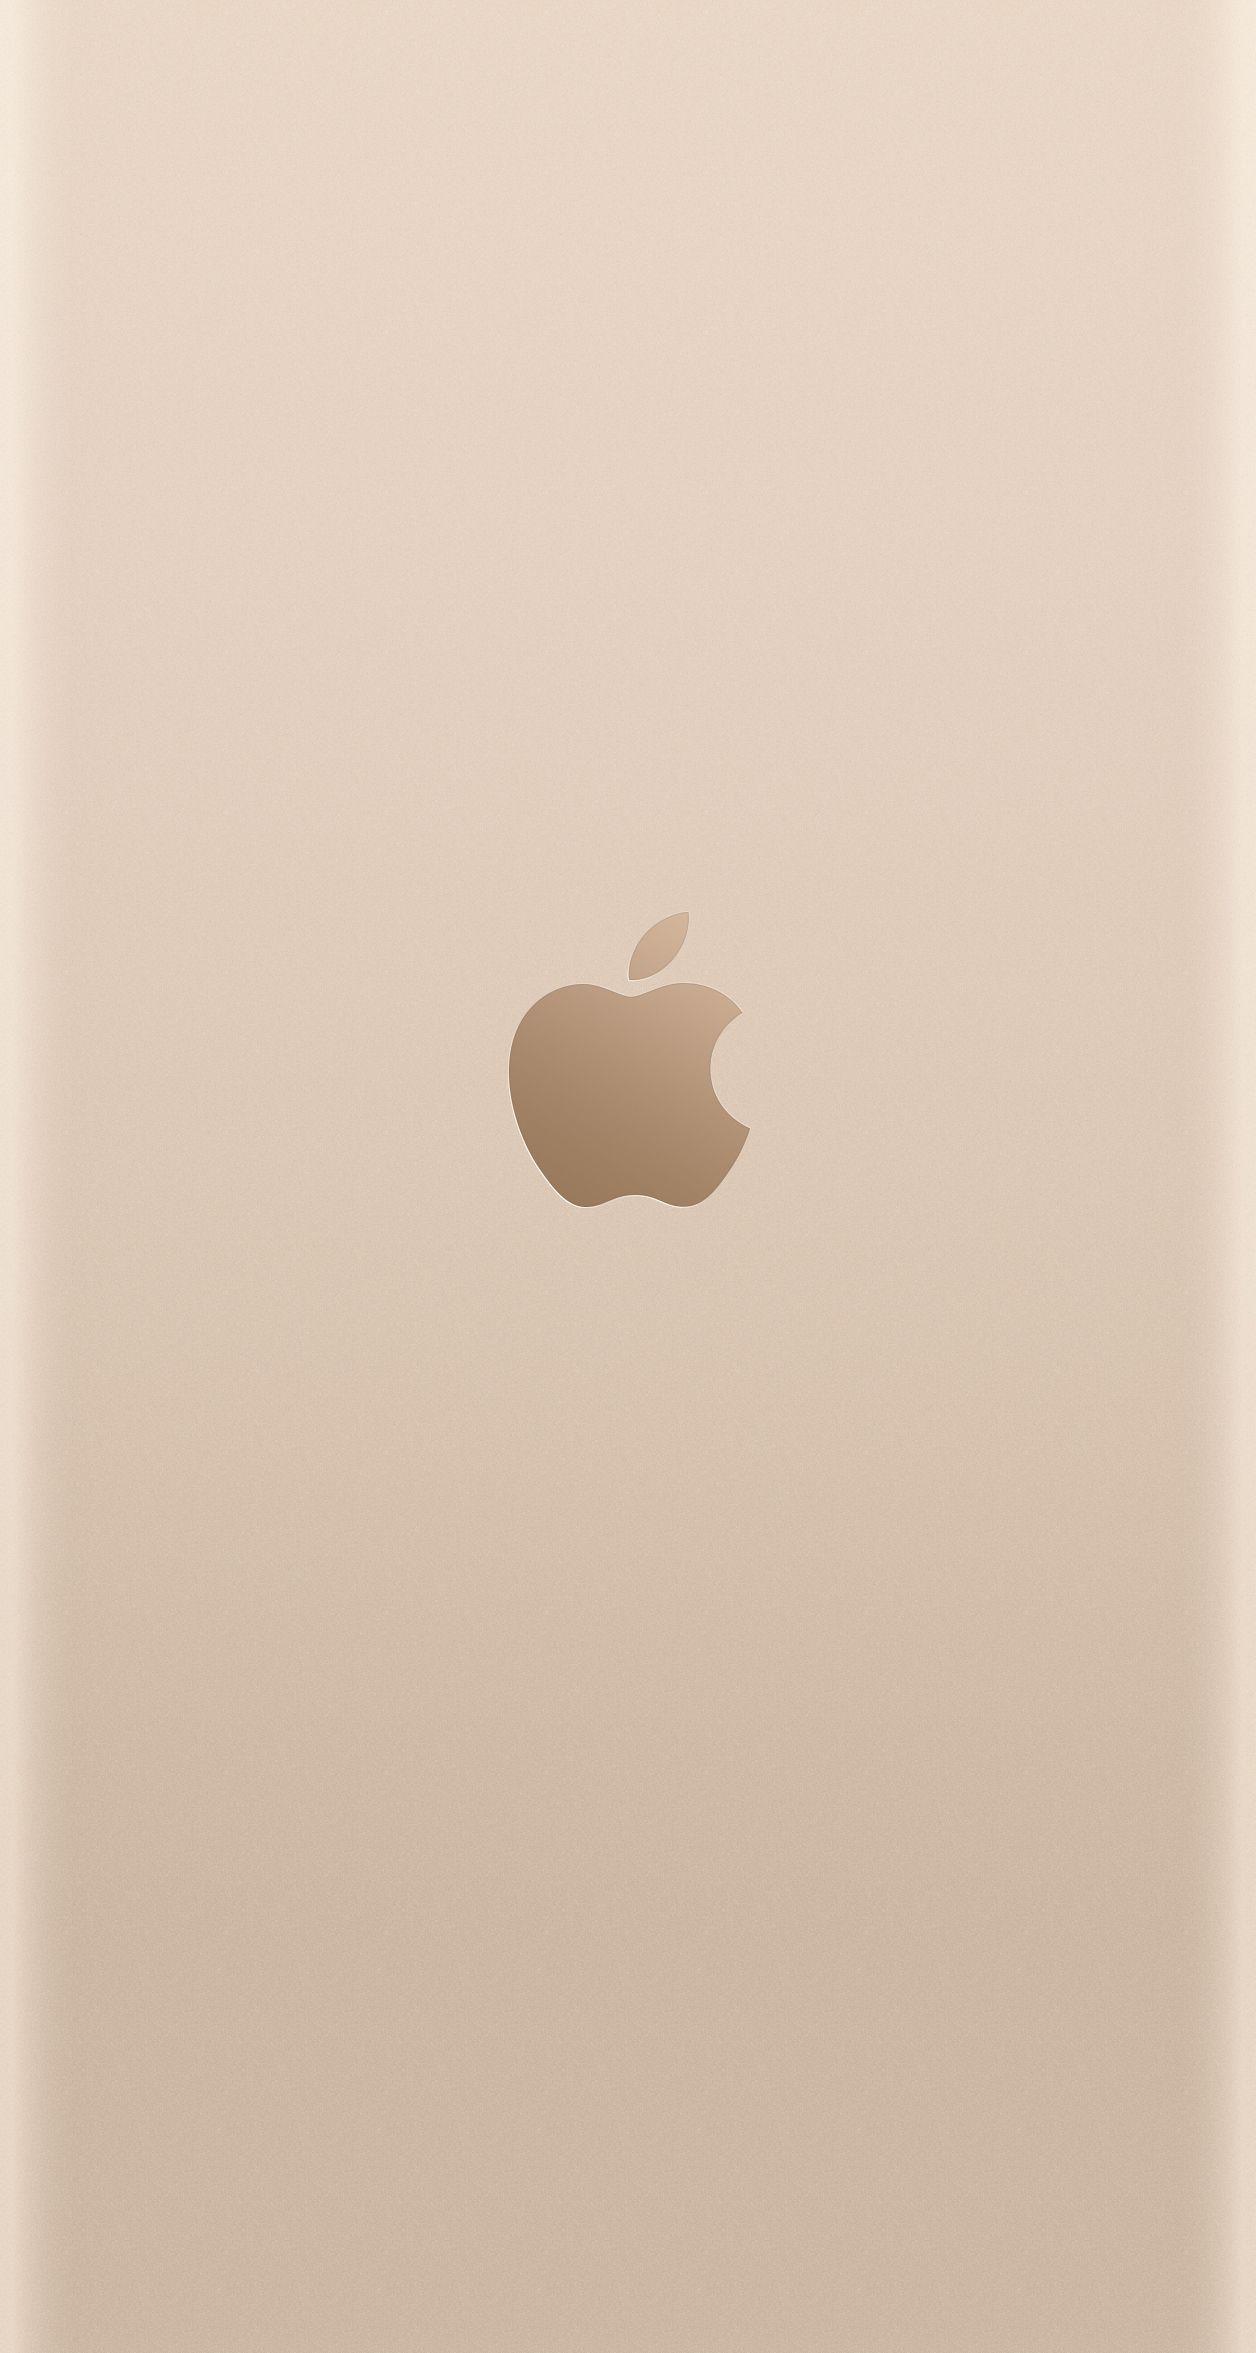 Gold Apple Logo - Apple logo wallpapers for iPhone 6